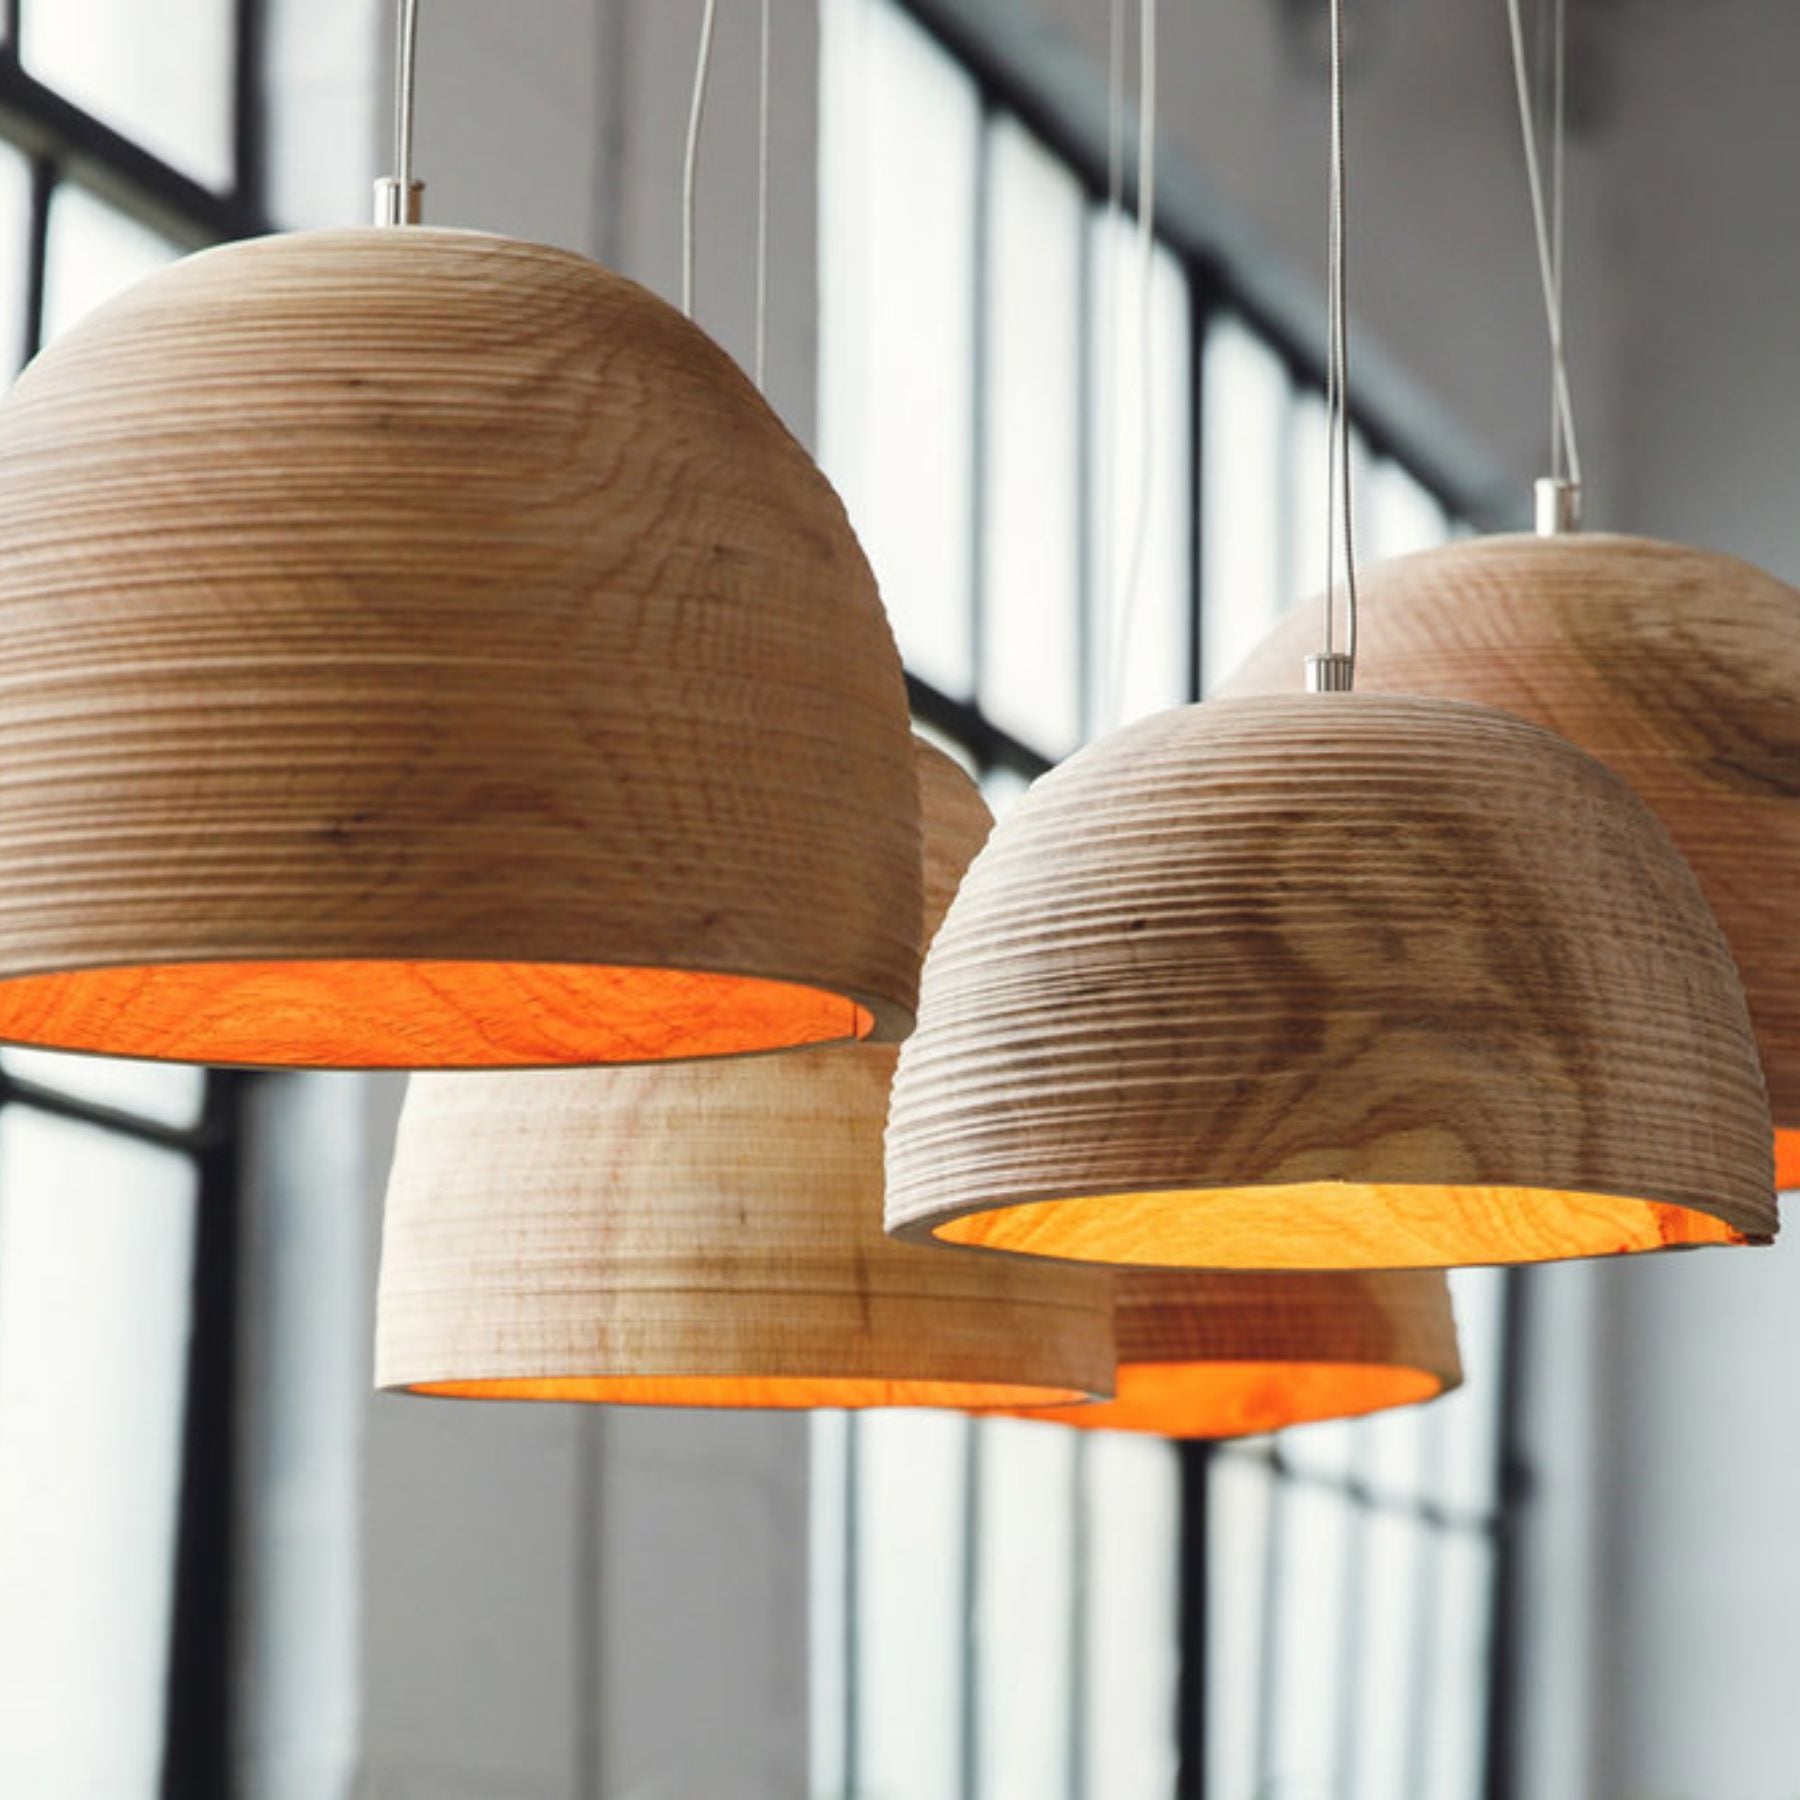 the texture and grain of the wood create a visual richness that adds character to the light